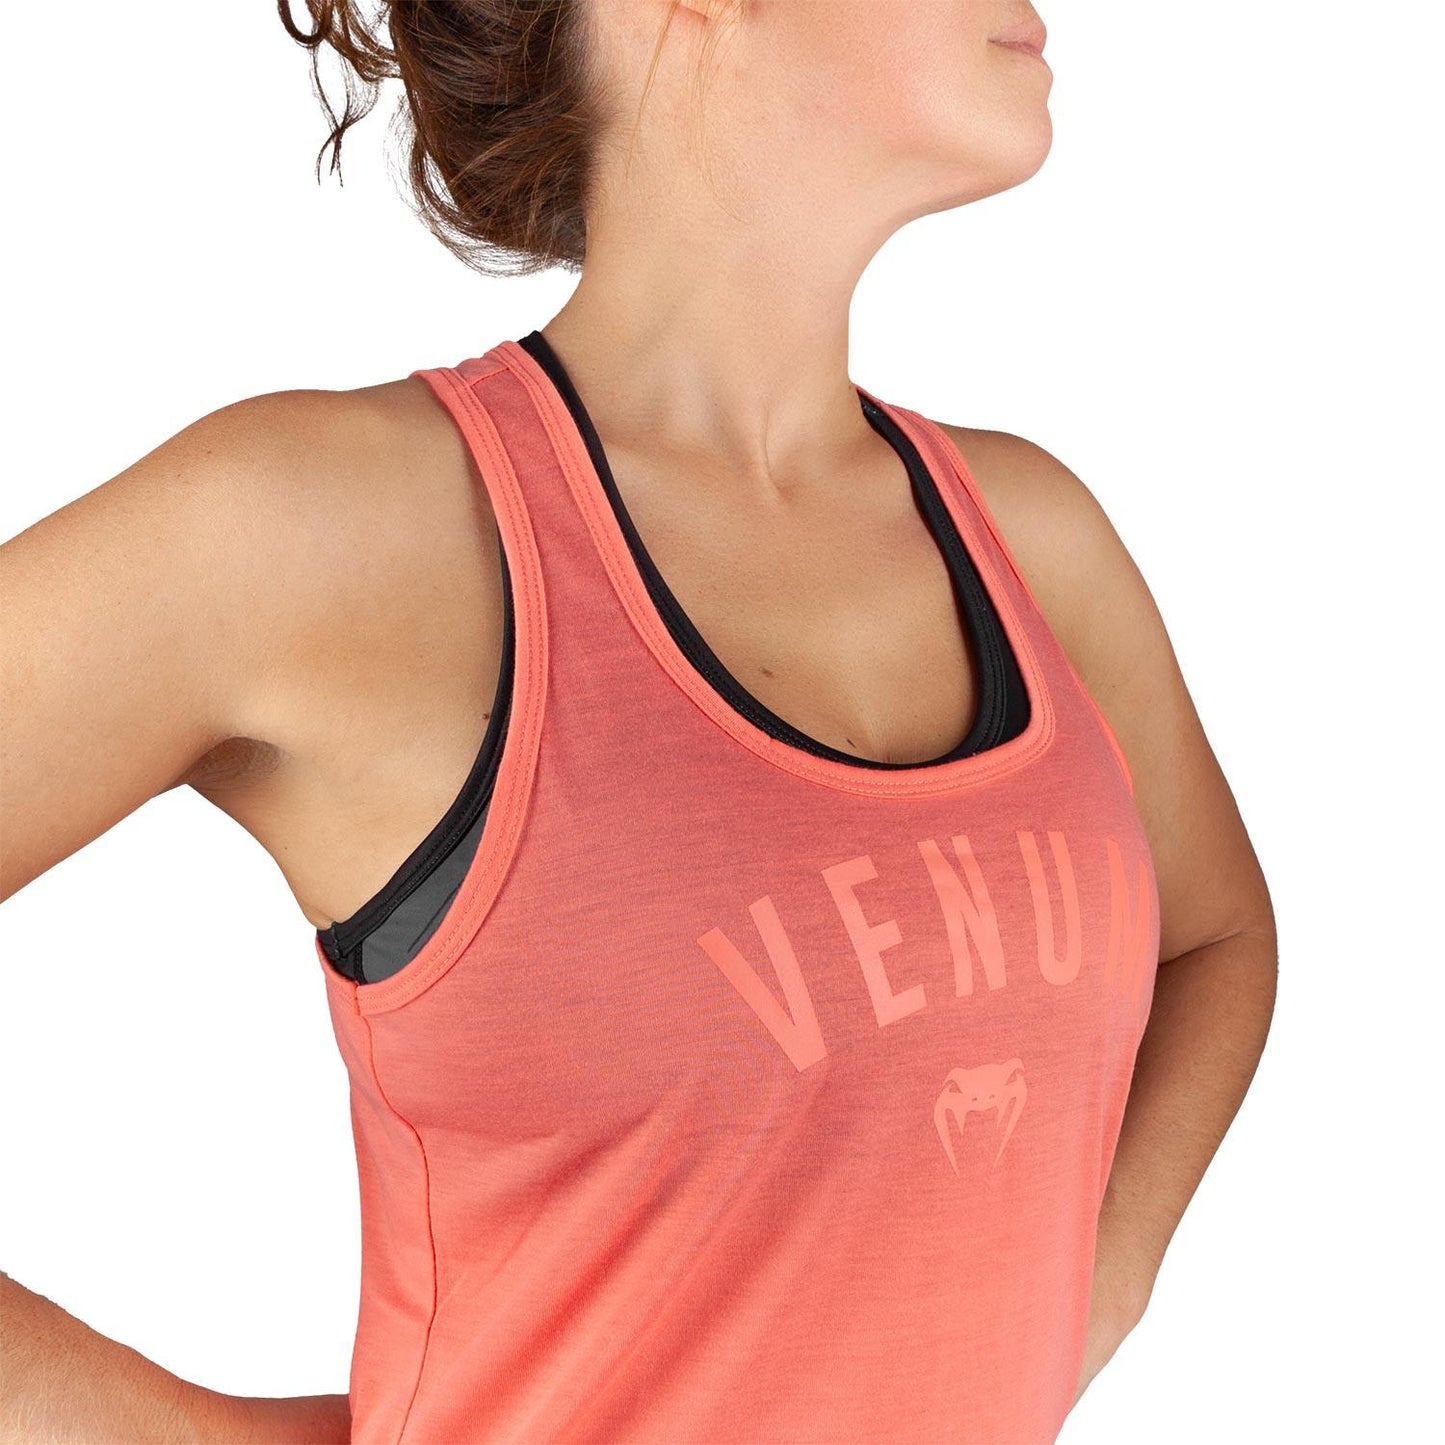 Venum Classic Tank Top - For Women - Pink Picture 5